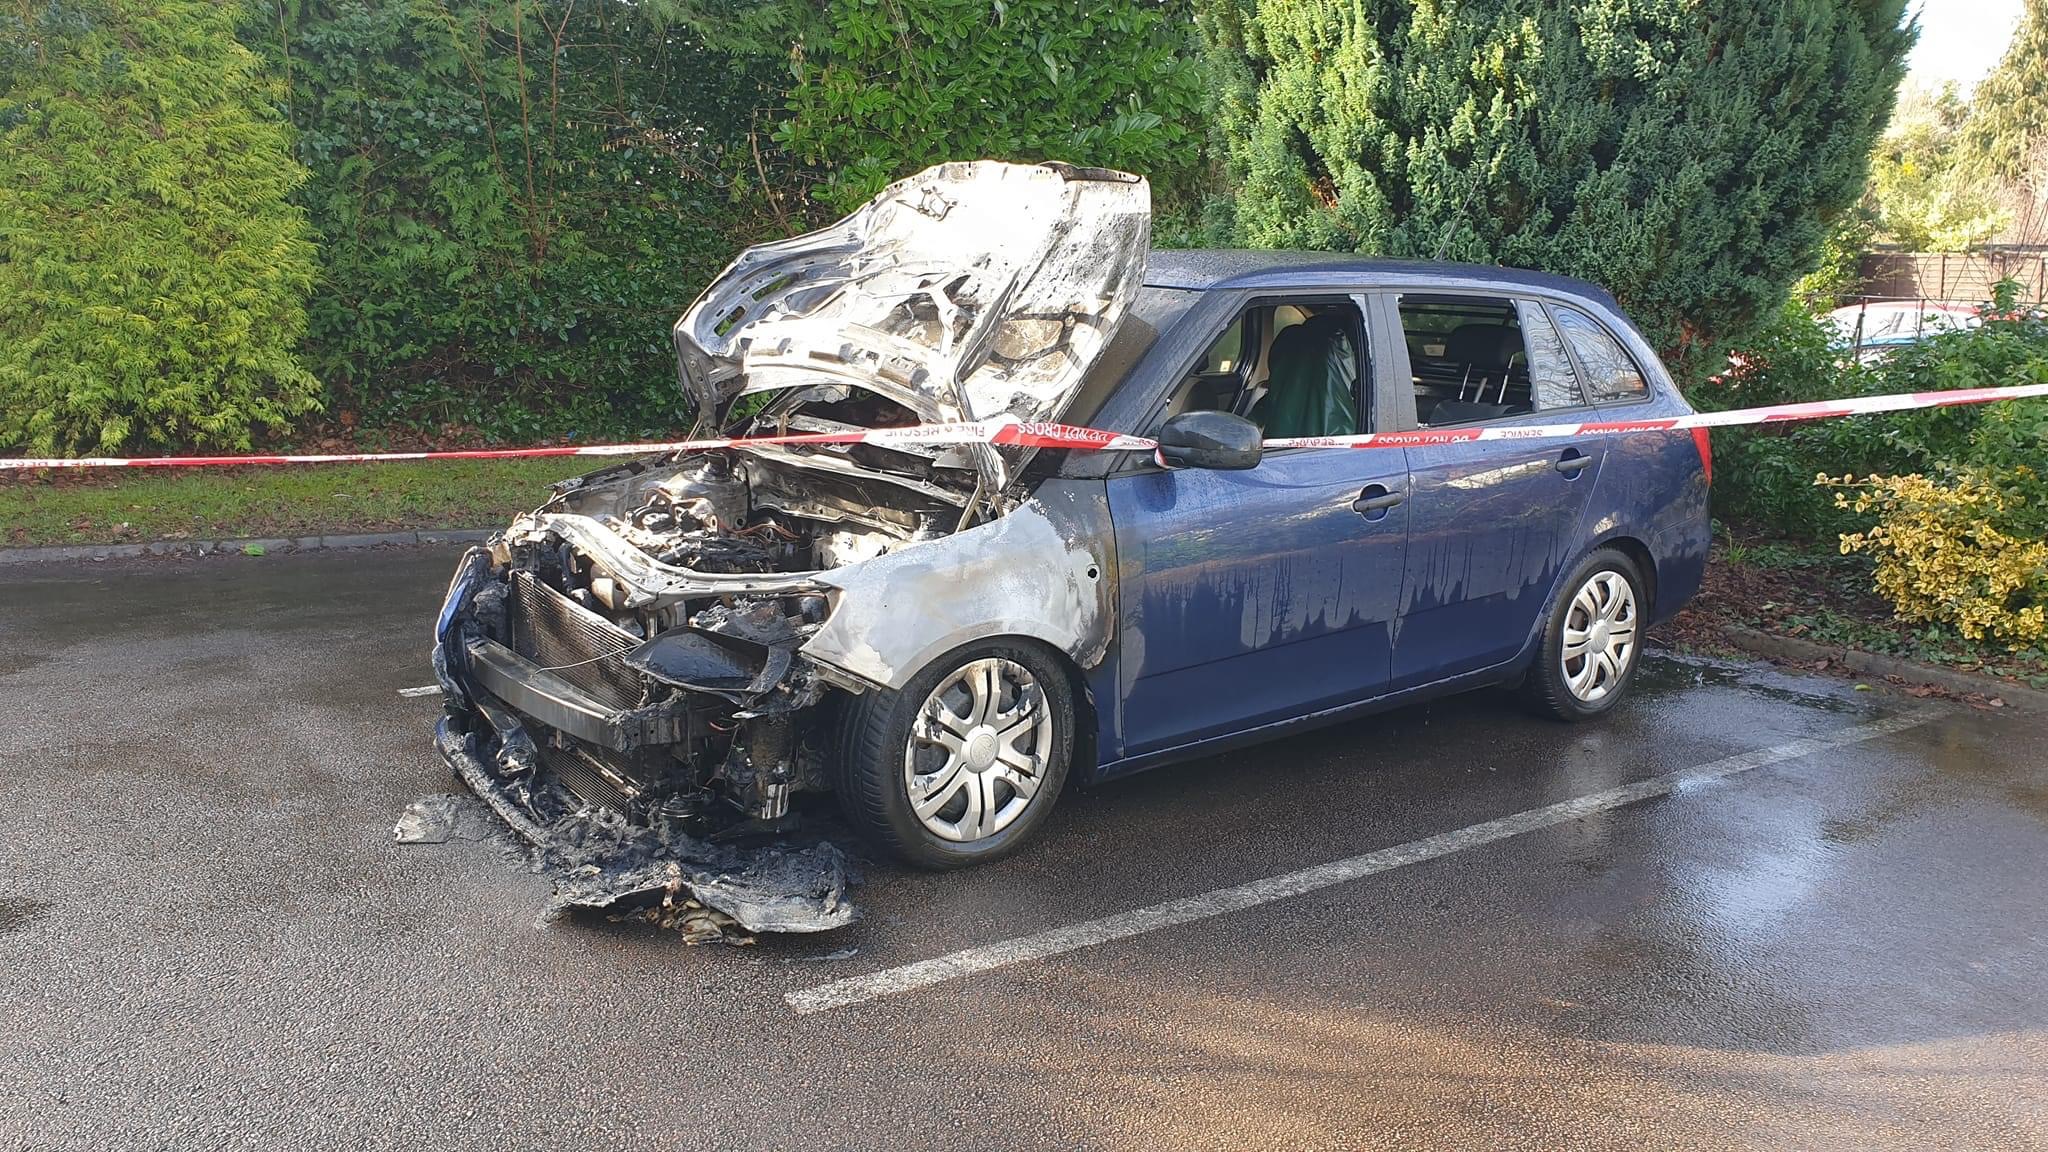 NEWS | Fire crews respond to a small vehicle fire at a church in Herefordshire